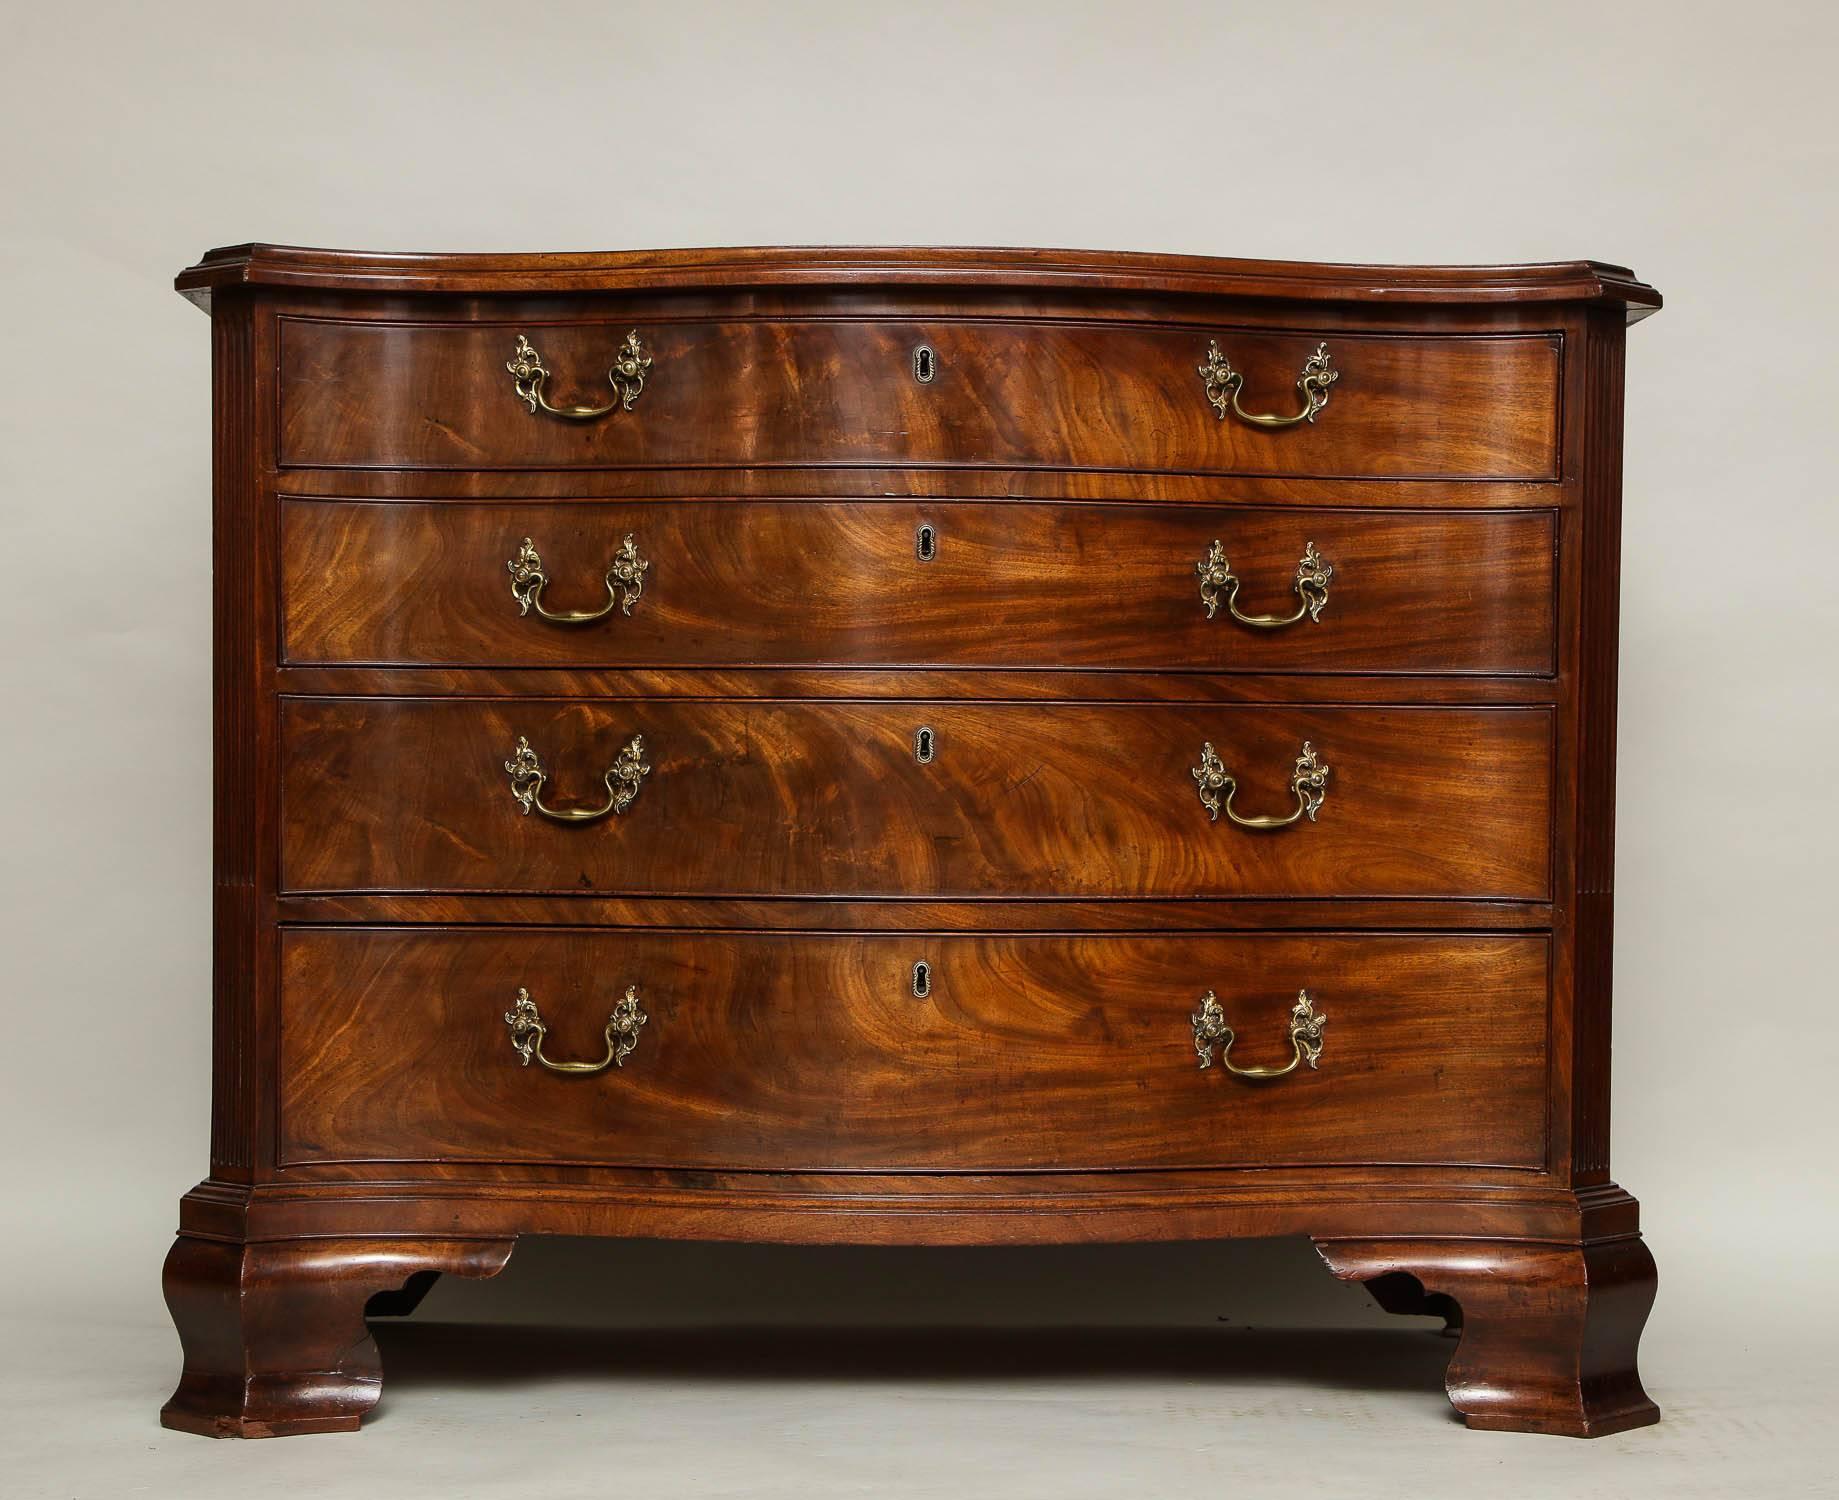 Very fine Georgian mahogany serpentine chest of drawers having a richly molded top over serpentine front, the canted edges featuring pilaster uprights with stop fluted molding, the graduated drawer fronts with original Rococo brass pulls retaining